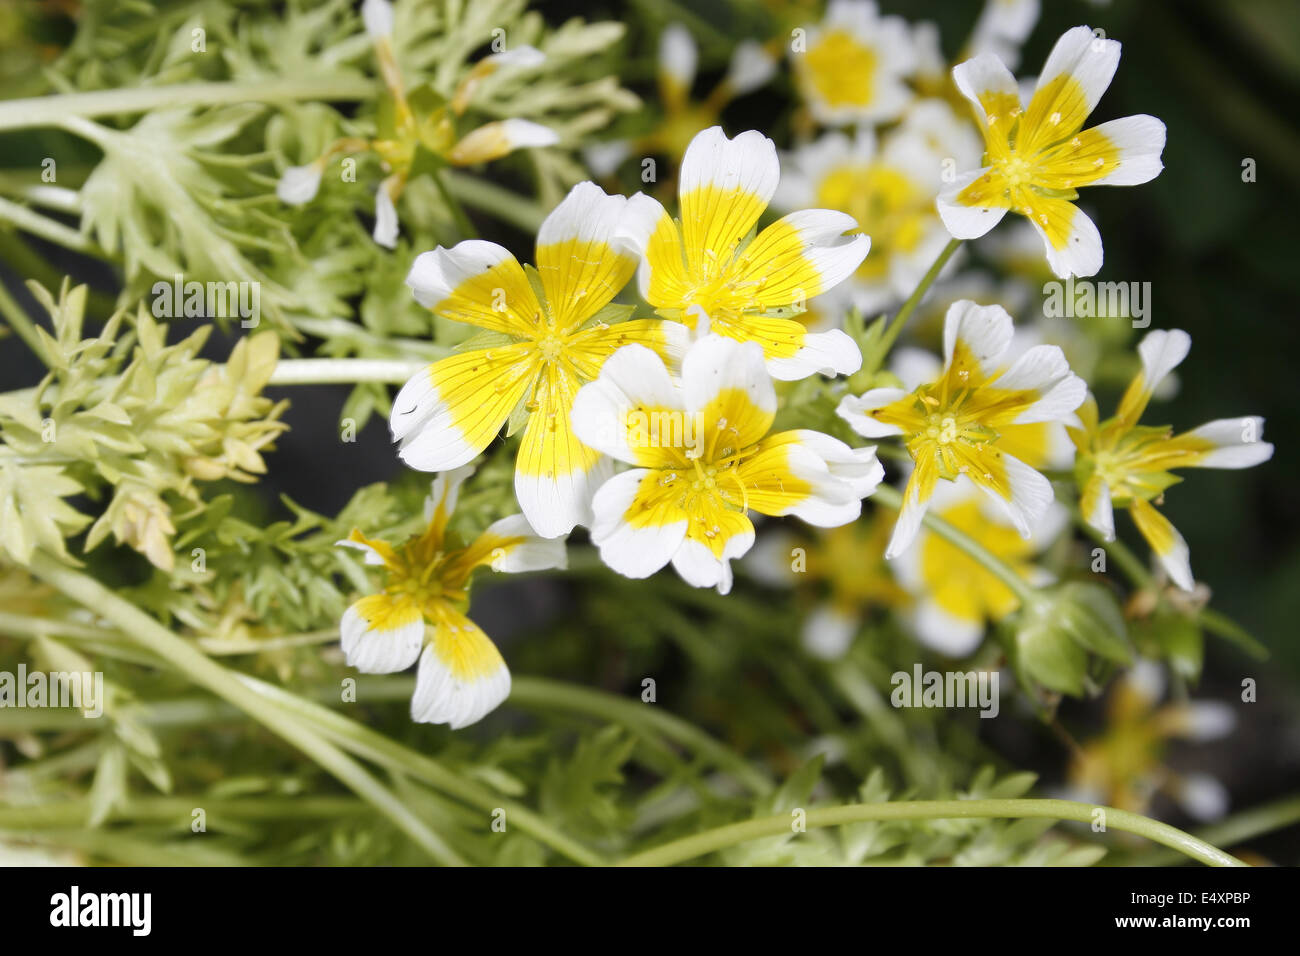 poacehd egg plant flowers in garden Limnanthes douglasii Stock Photo